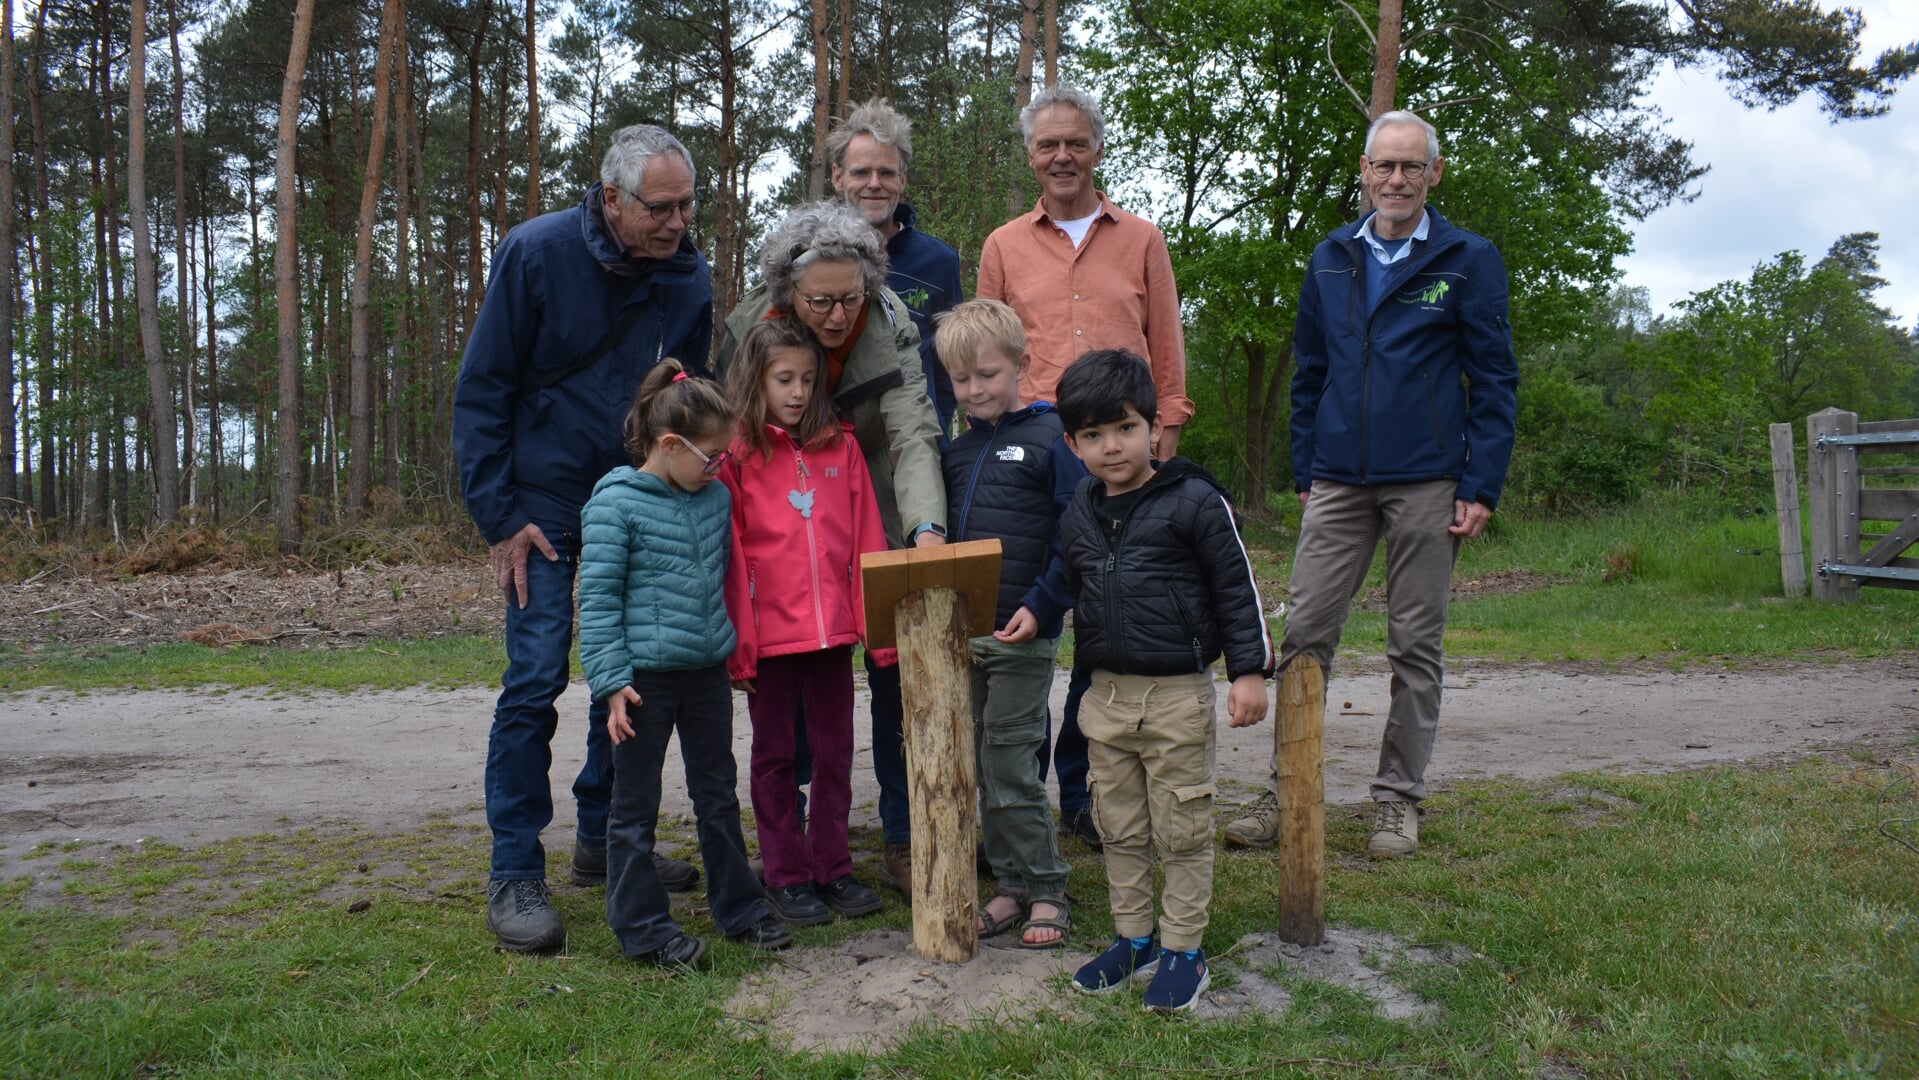 Opening Kinderroute.